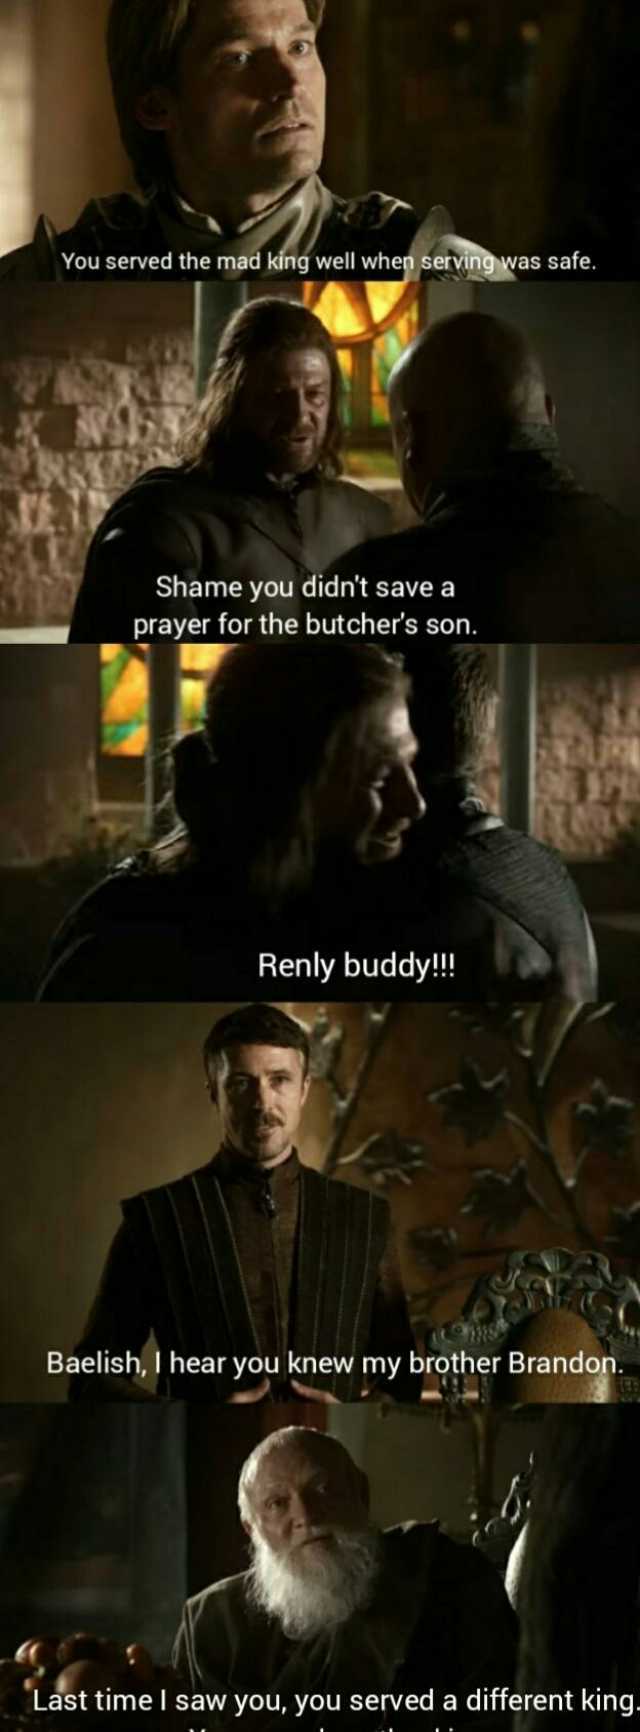 You served the mad king well when servingwas safe. Shame you didnt save a prayer for the butchers son. Renly buddy! Baelish I hear you knew my brother Brandon. Last time I saw you you served a different king.